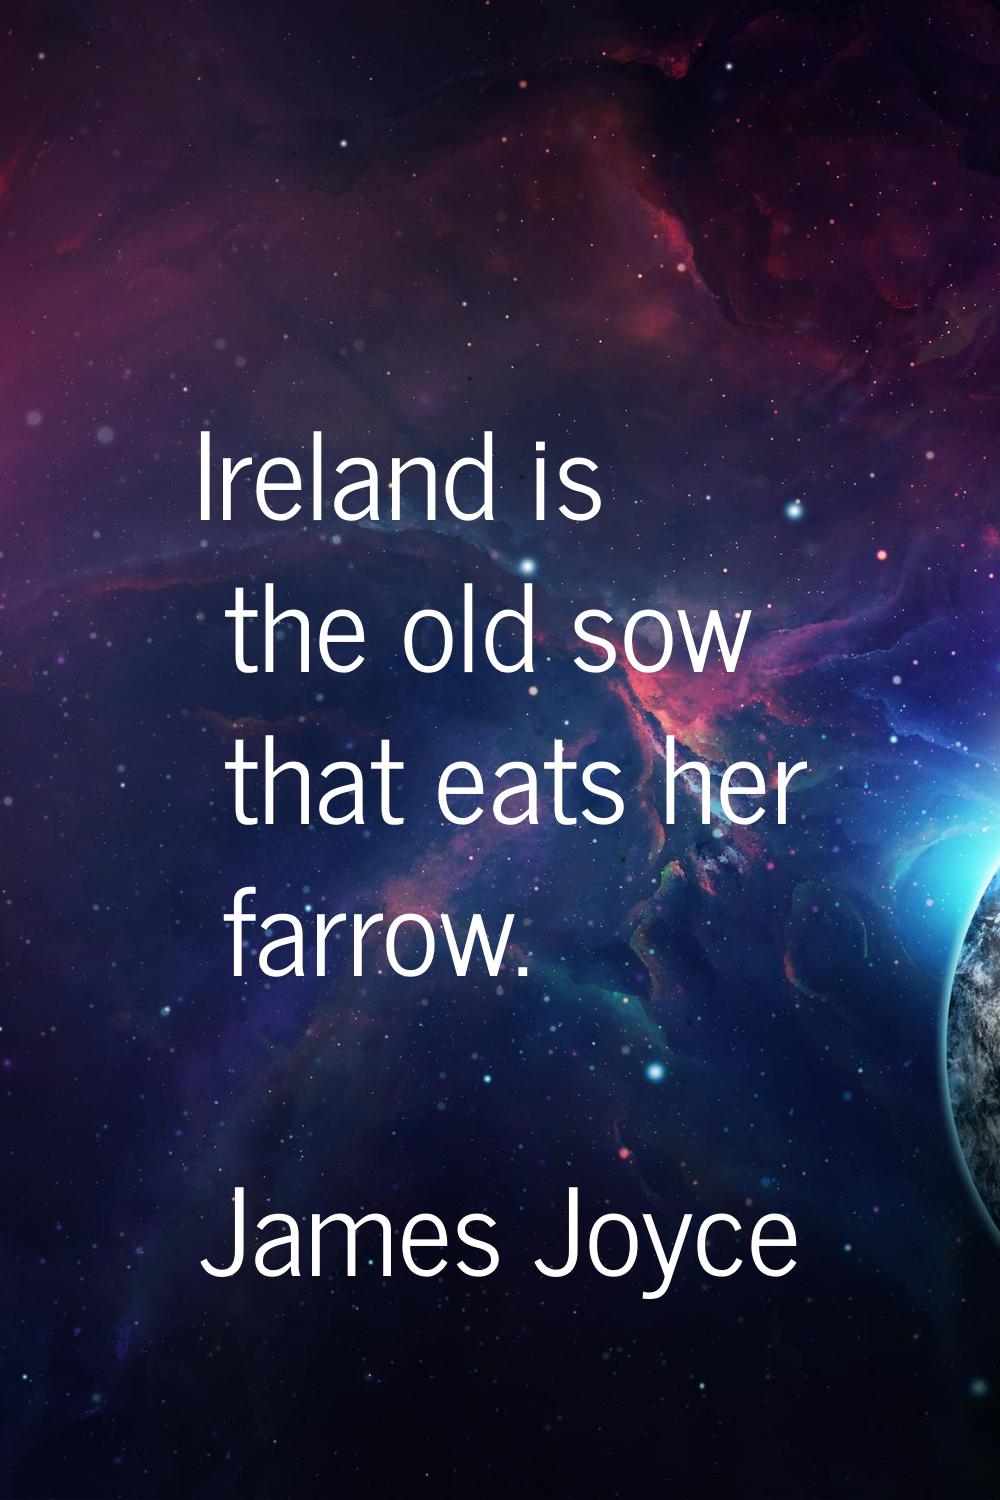 Ireland is the old sow that eats her farrow.